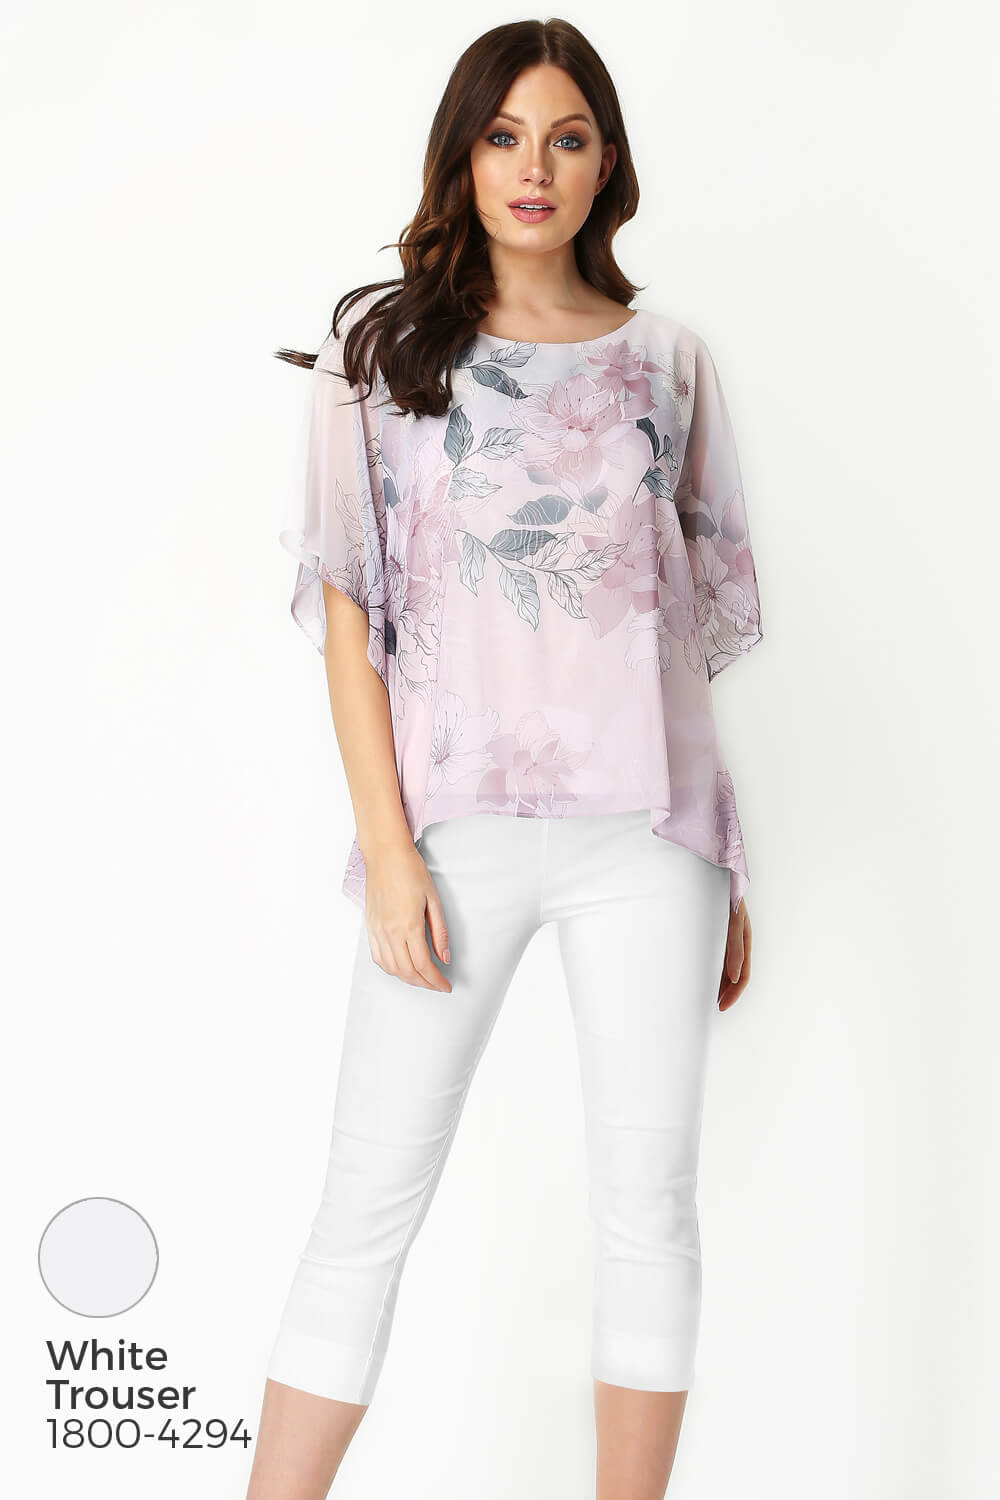 PINK Floral Chiffon Overlay Top, Image 5 of 8